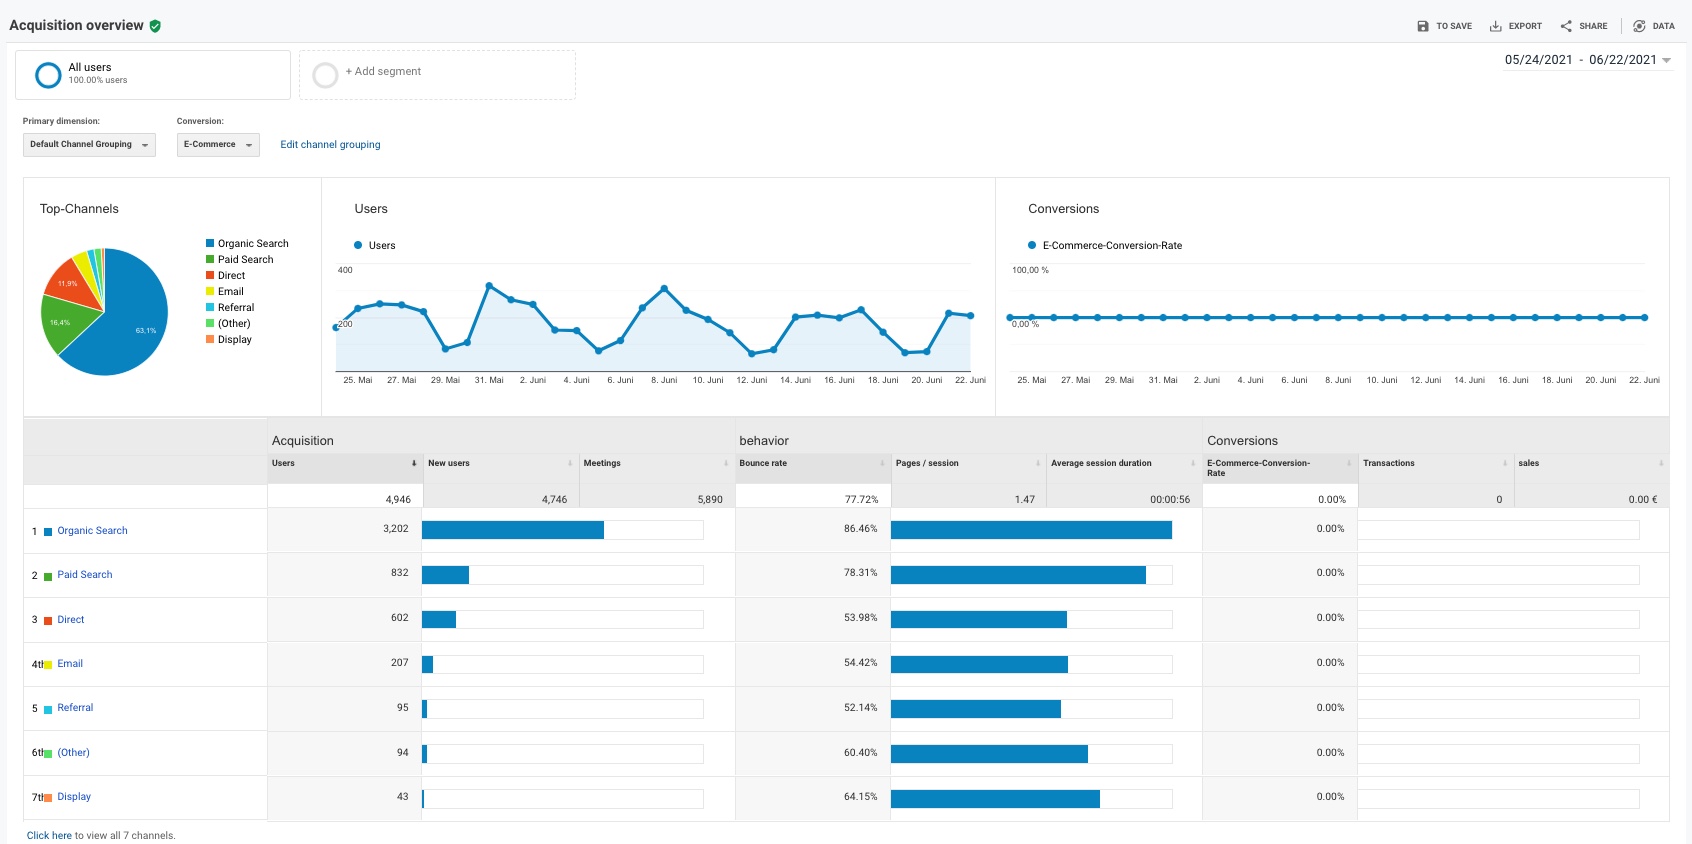 The image shows you a screenshot of the acquisition overview of Google Analytics. Here you can make detailed analyses of your visitor traffic and see how the user flow on your site comes about.